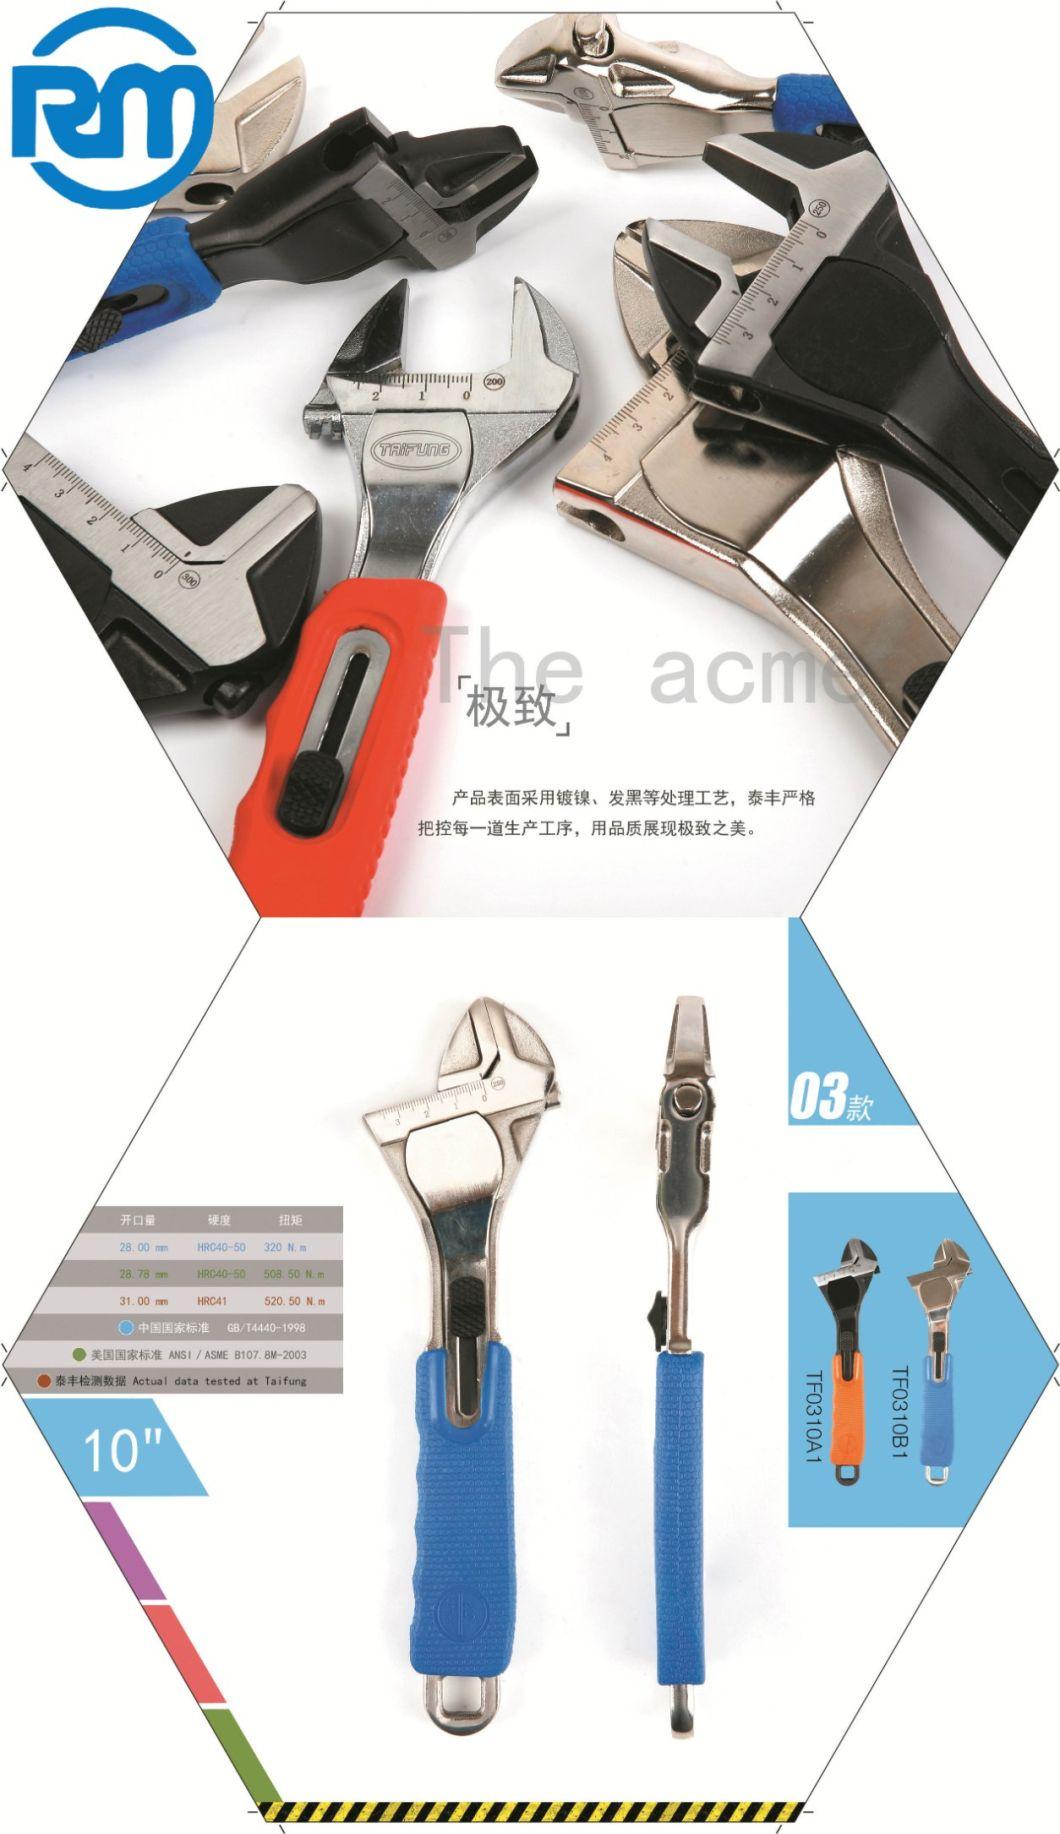 Super Multi Function Double Ended Ratchet Gear Combination Adjustable Wrench Spanner Set Tools Kits Professional Quality Sliding Adjusting Button